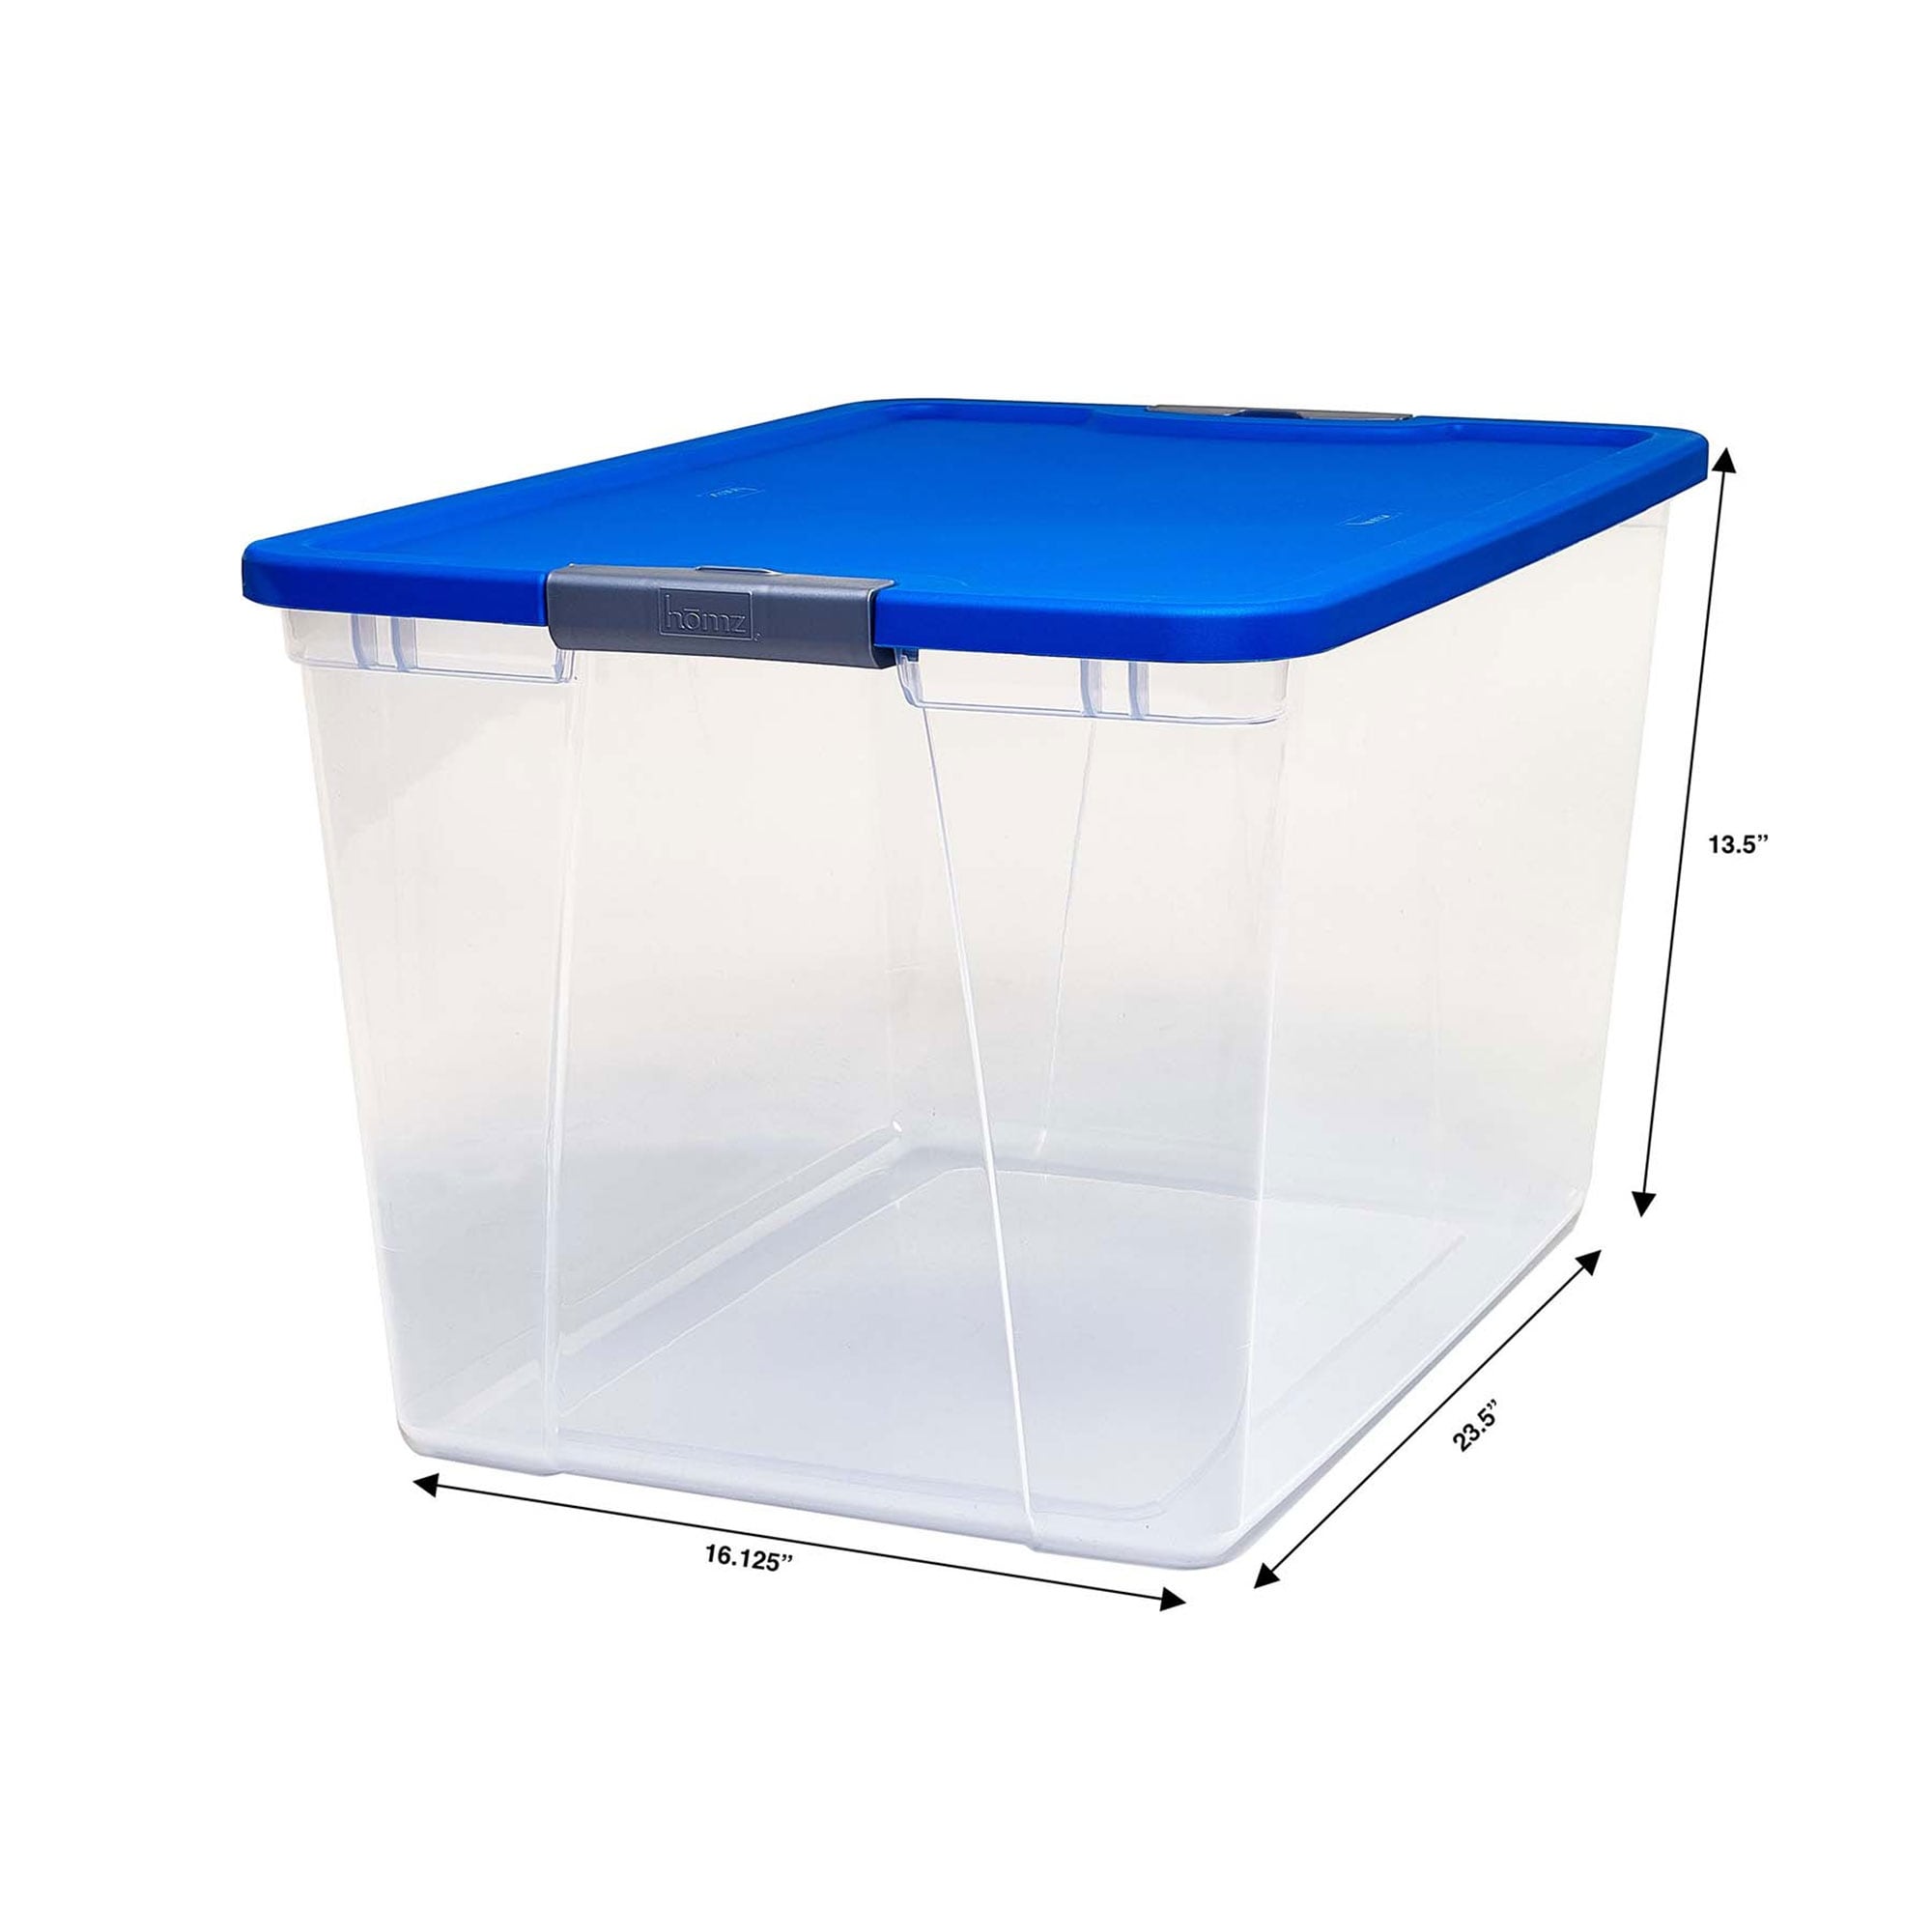 Homz 32 Gallon Large Standard Stackable Plastic Storage Container Bin with Secure Snap Lid for Home Organization, Blue (4 Pack)